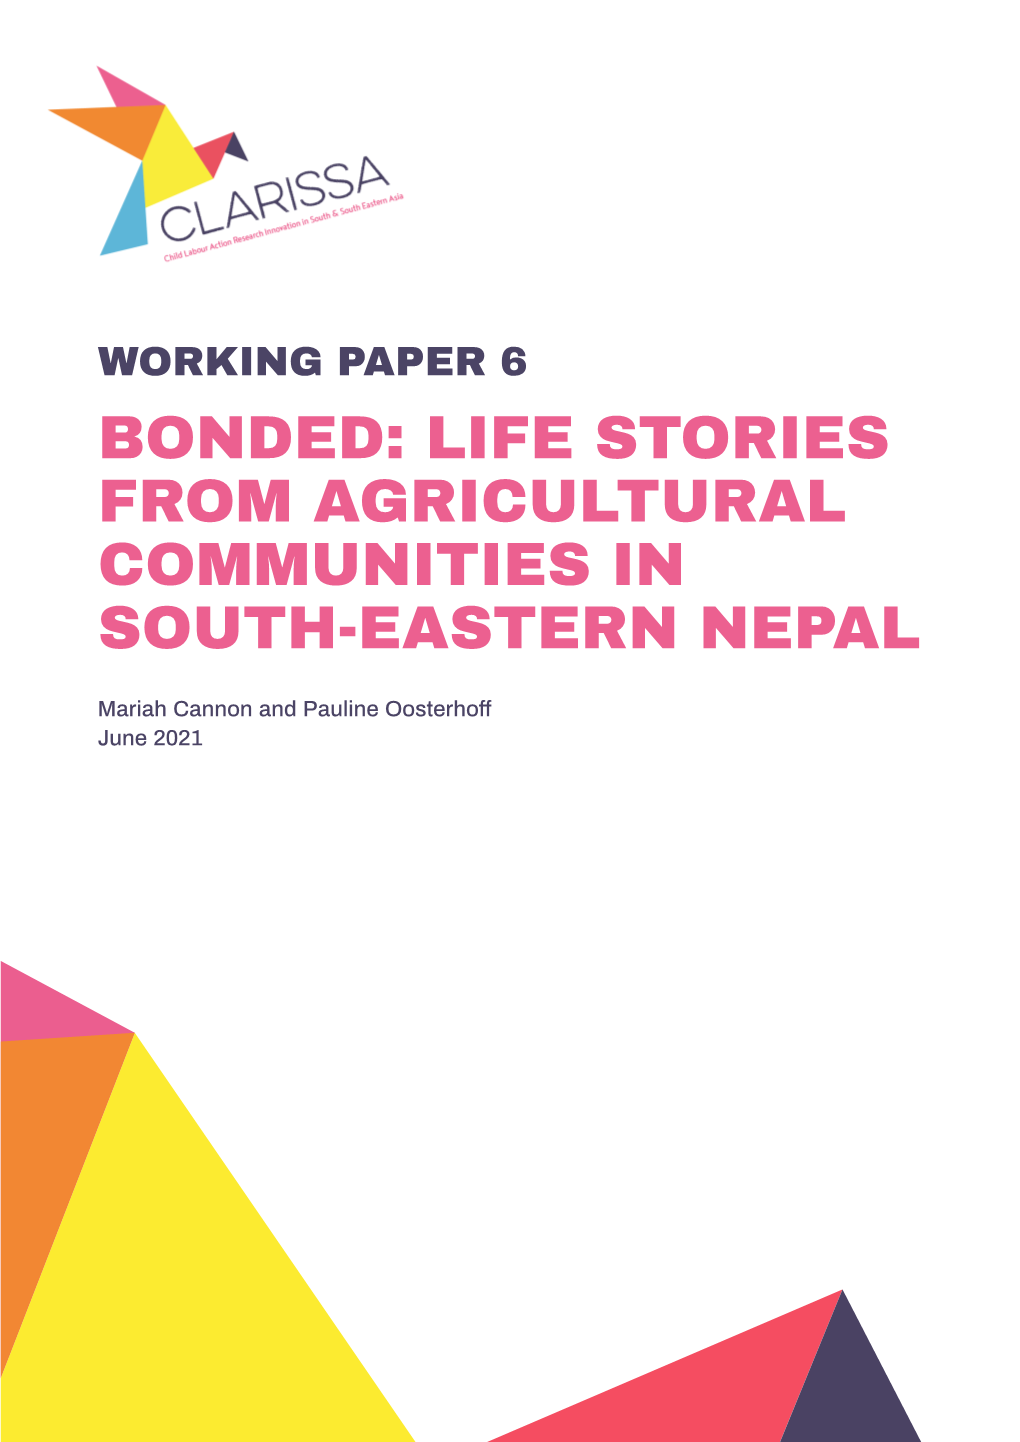 Life Stories from Agricultural Communities in South-Eastern Nepal